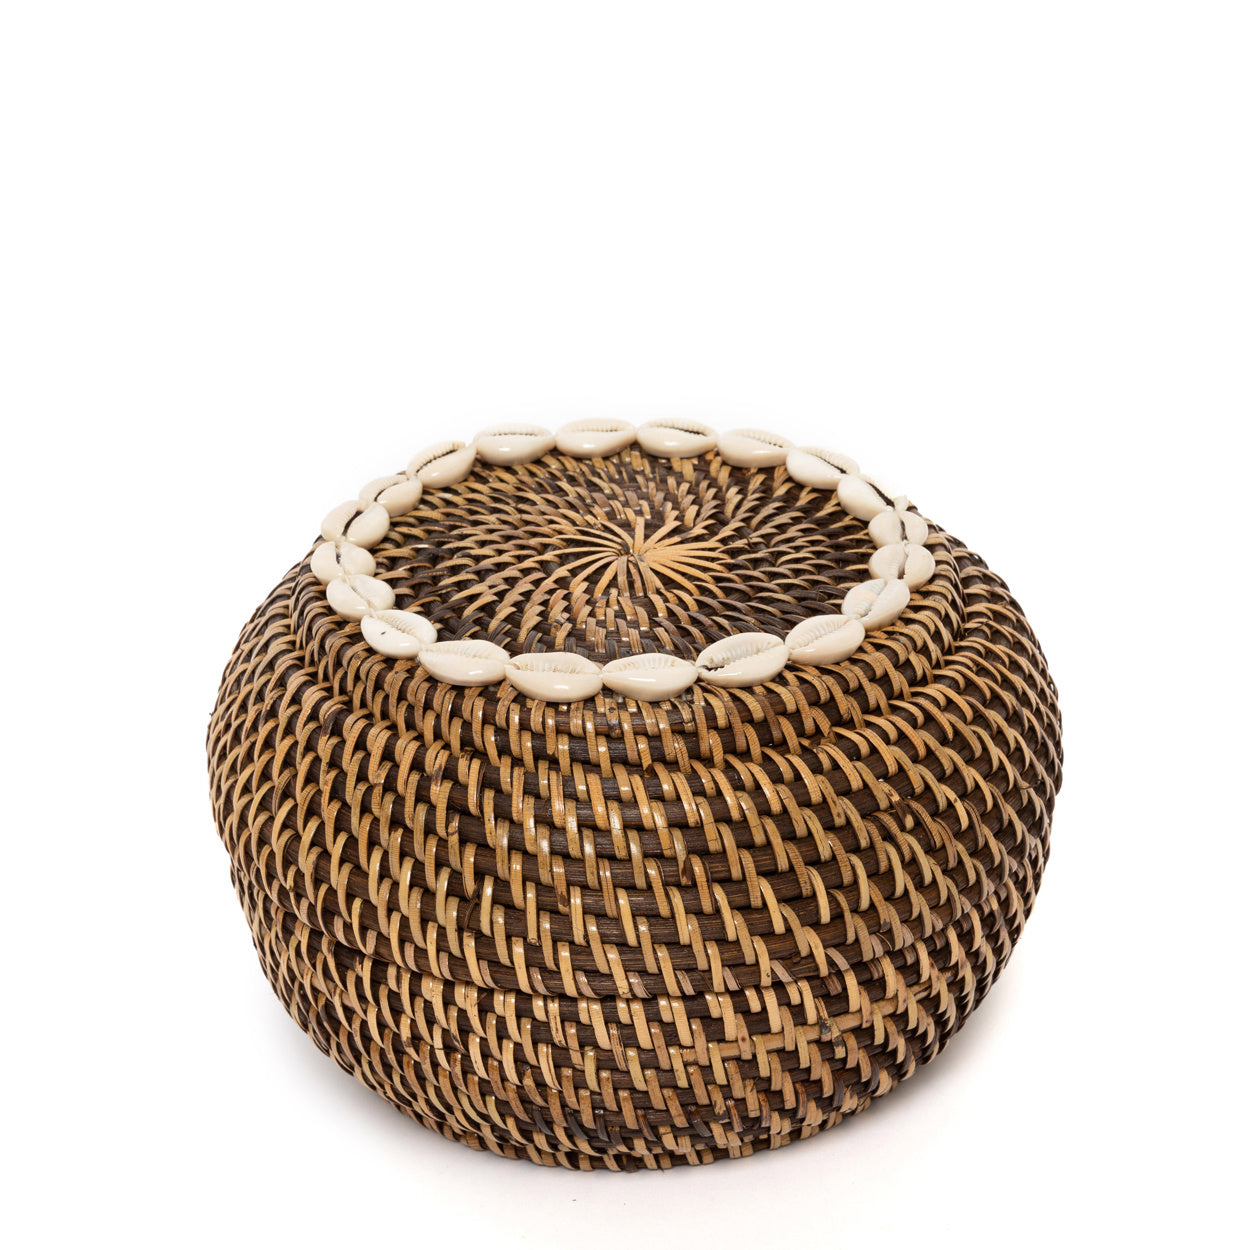 THE COLONIAL PEEK-A-BOO Basket Natural Brown Small